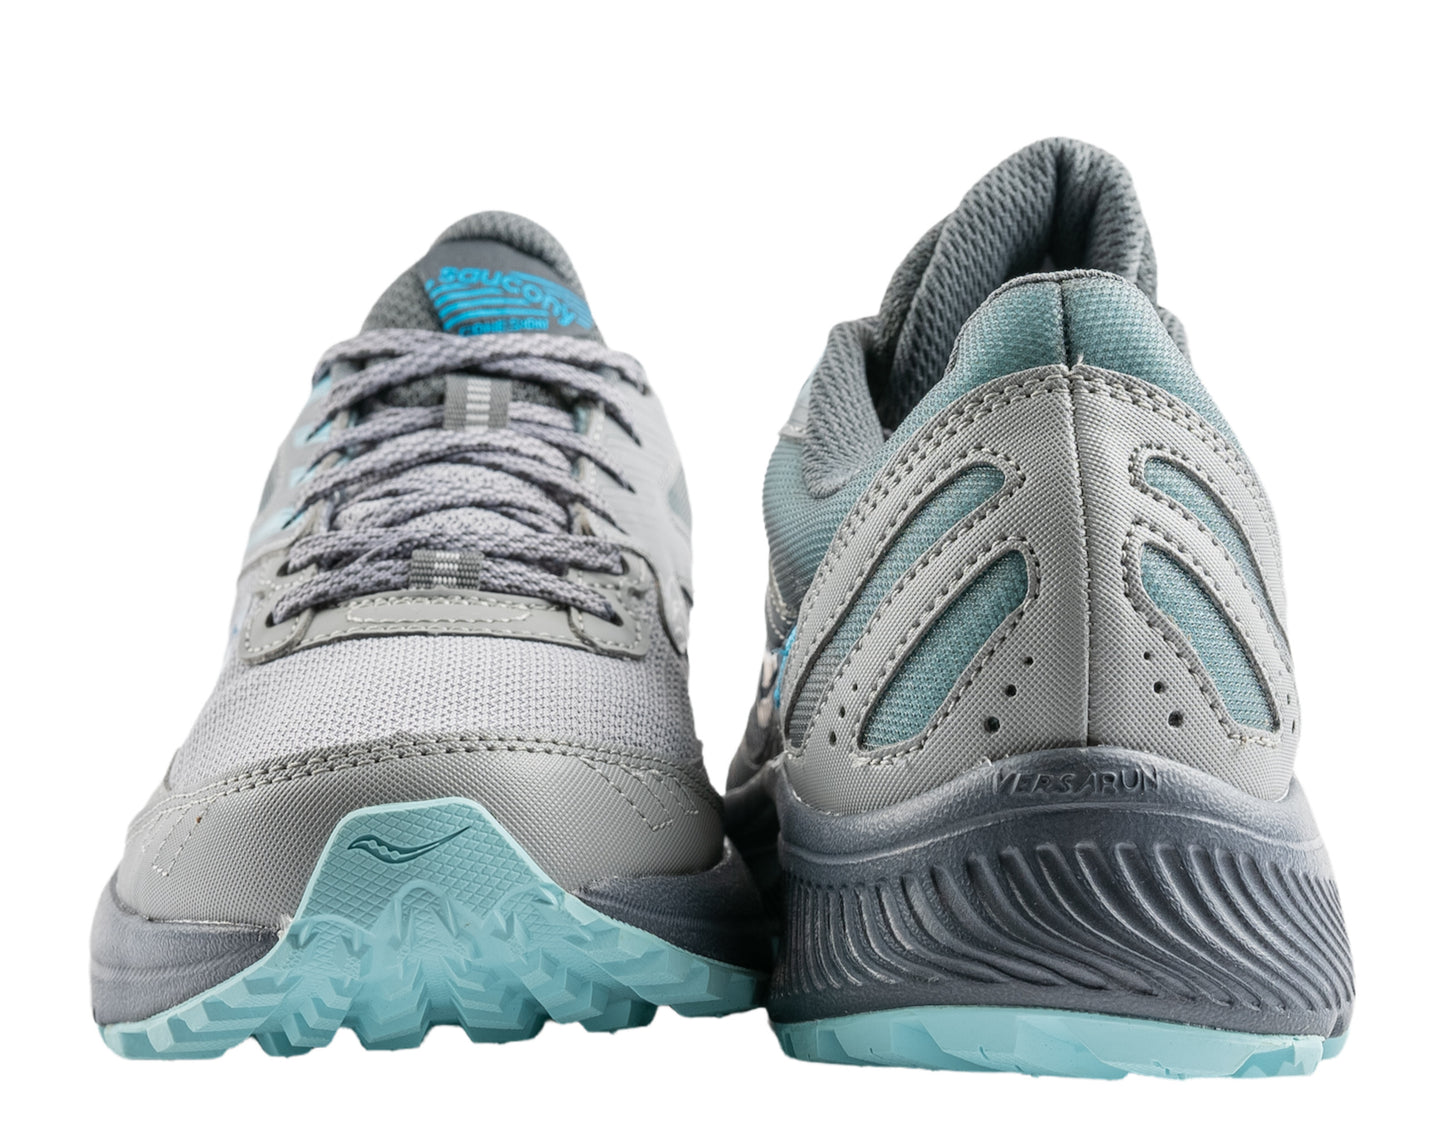 Saucony Cohesion TR15 Women's Running Shoes